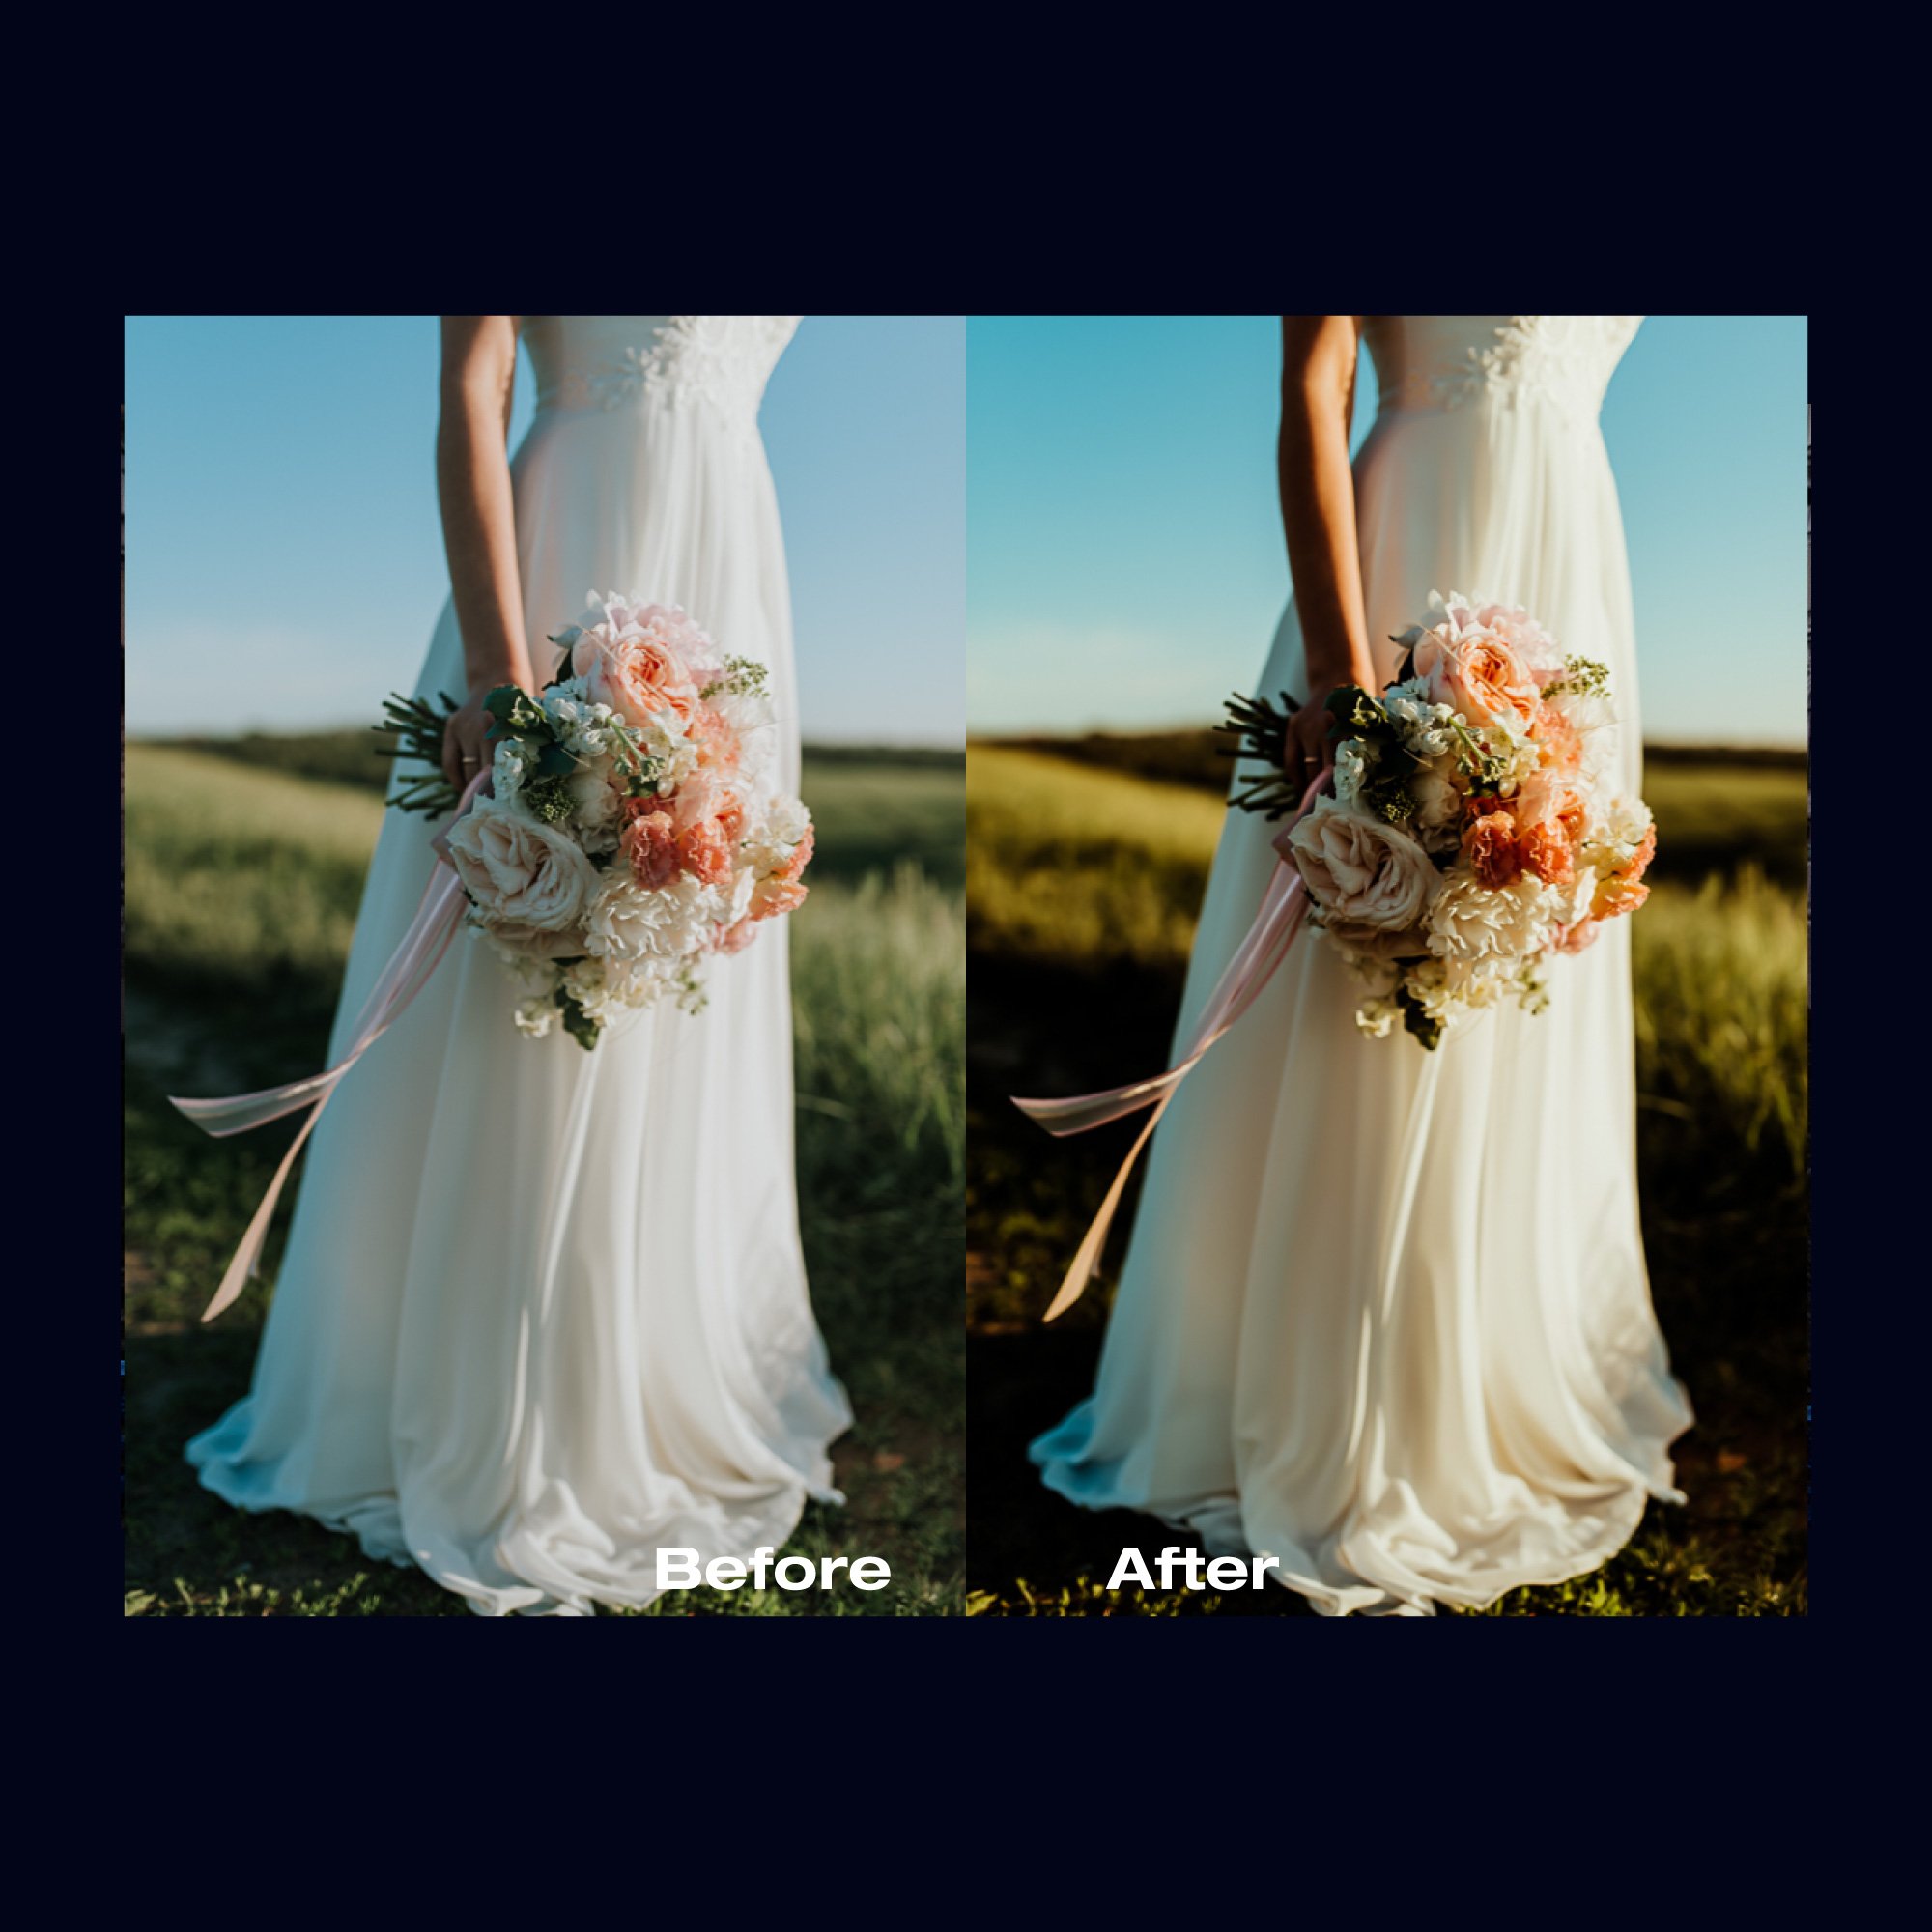 60 wedding before after 02 374